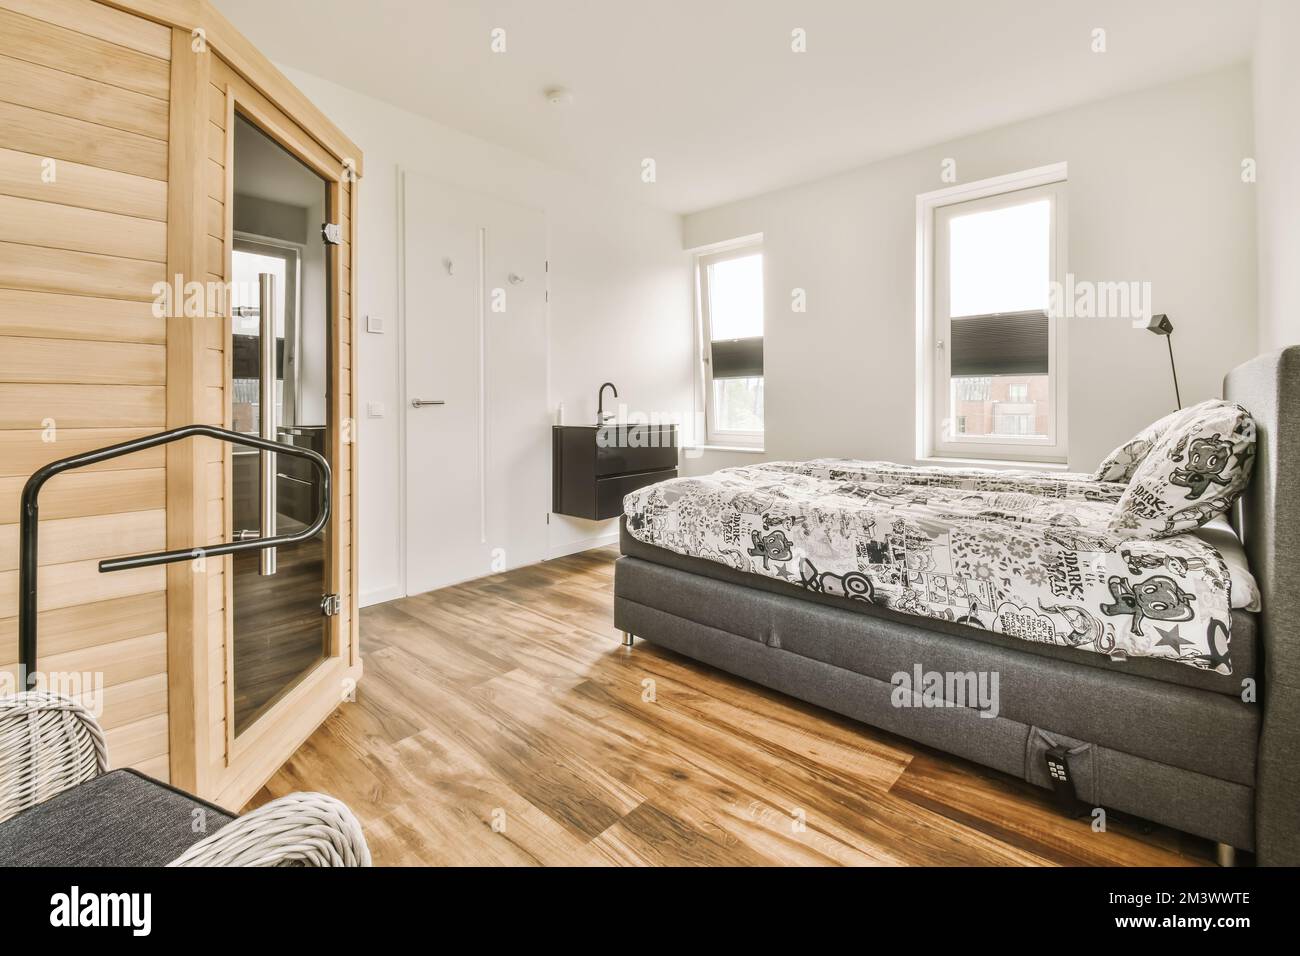 a bed in a room with wood flooring and white walls behind the bed is a large window that looks out to the outside Stock Photo